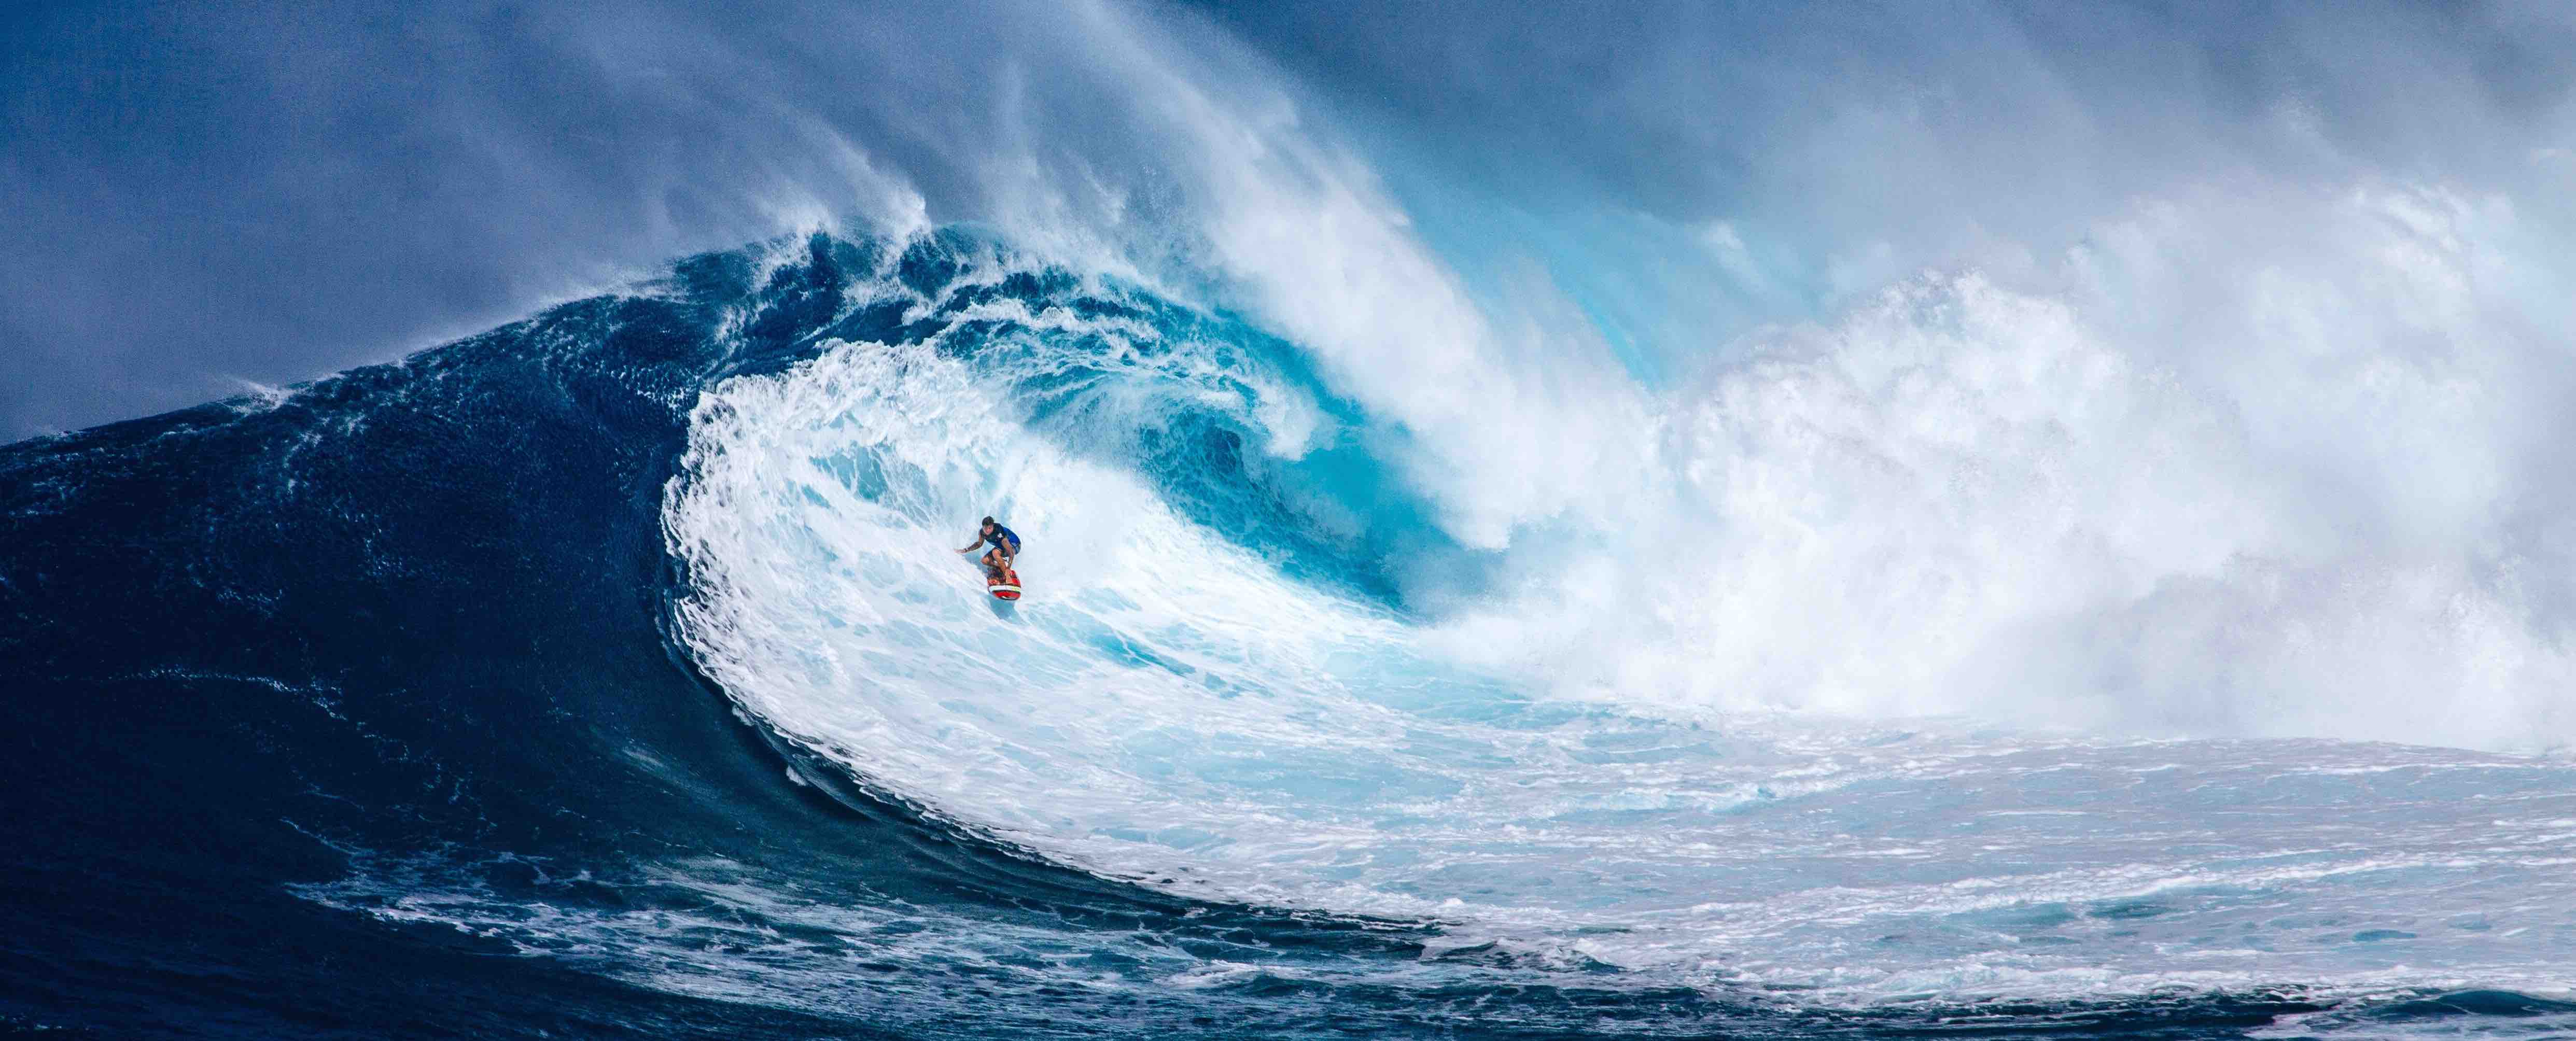 Verification 3.0: Grab Your Surfboards, the Next Big Wave is Coming